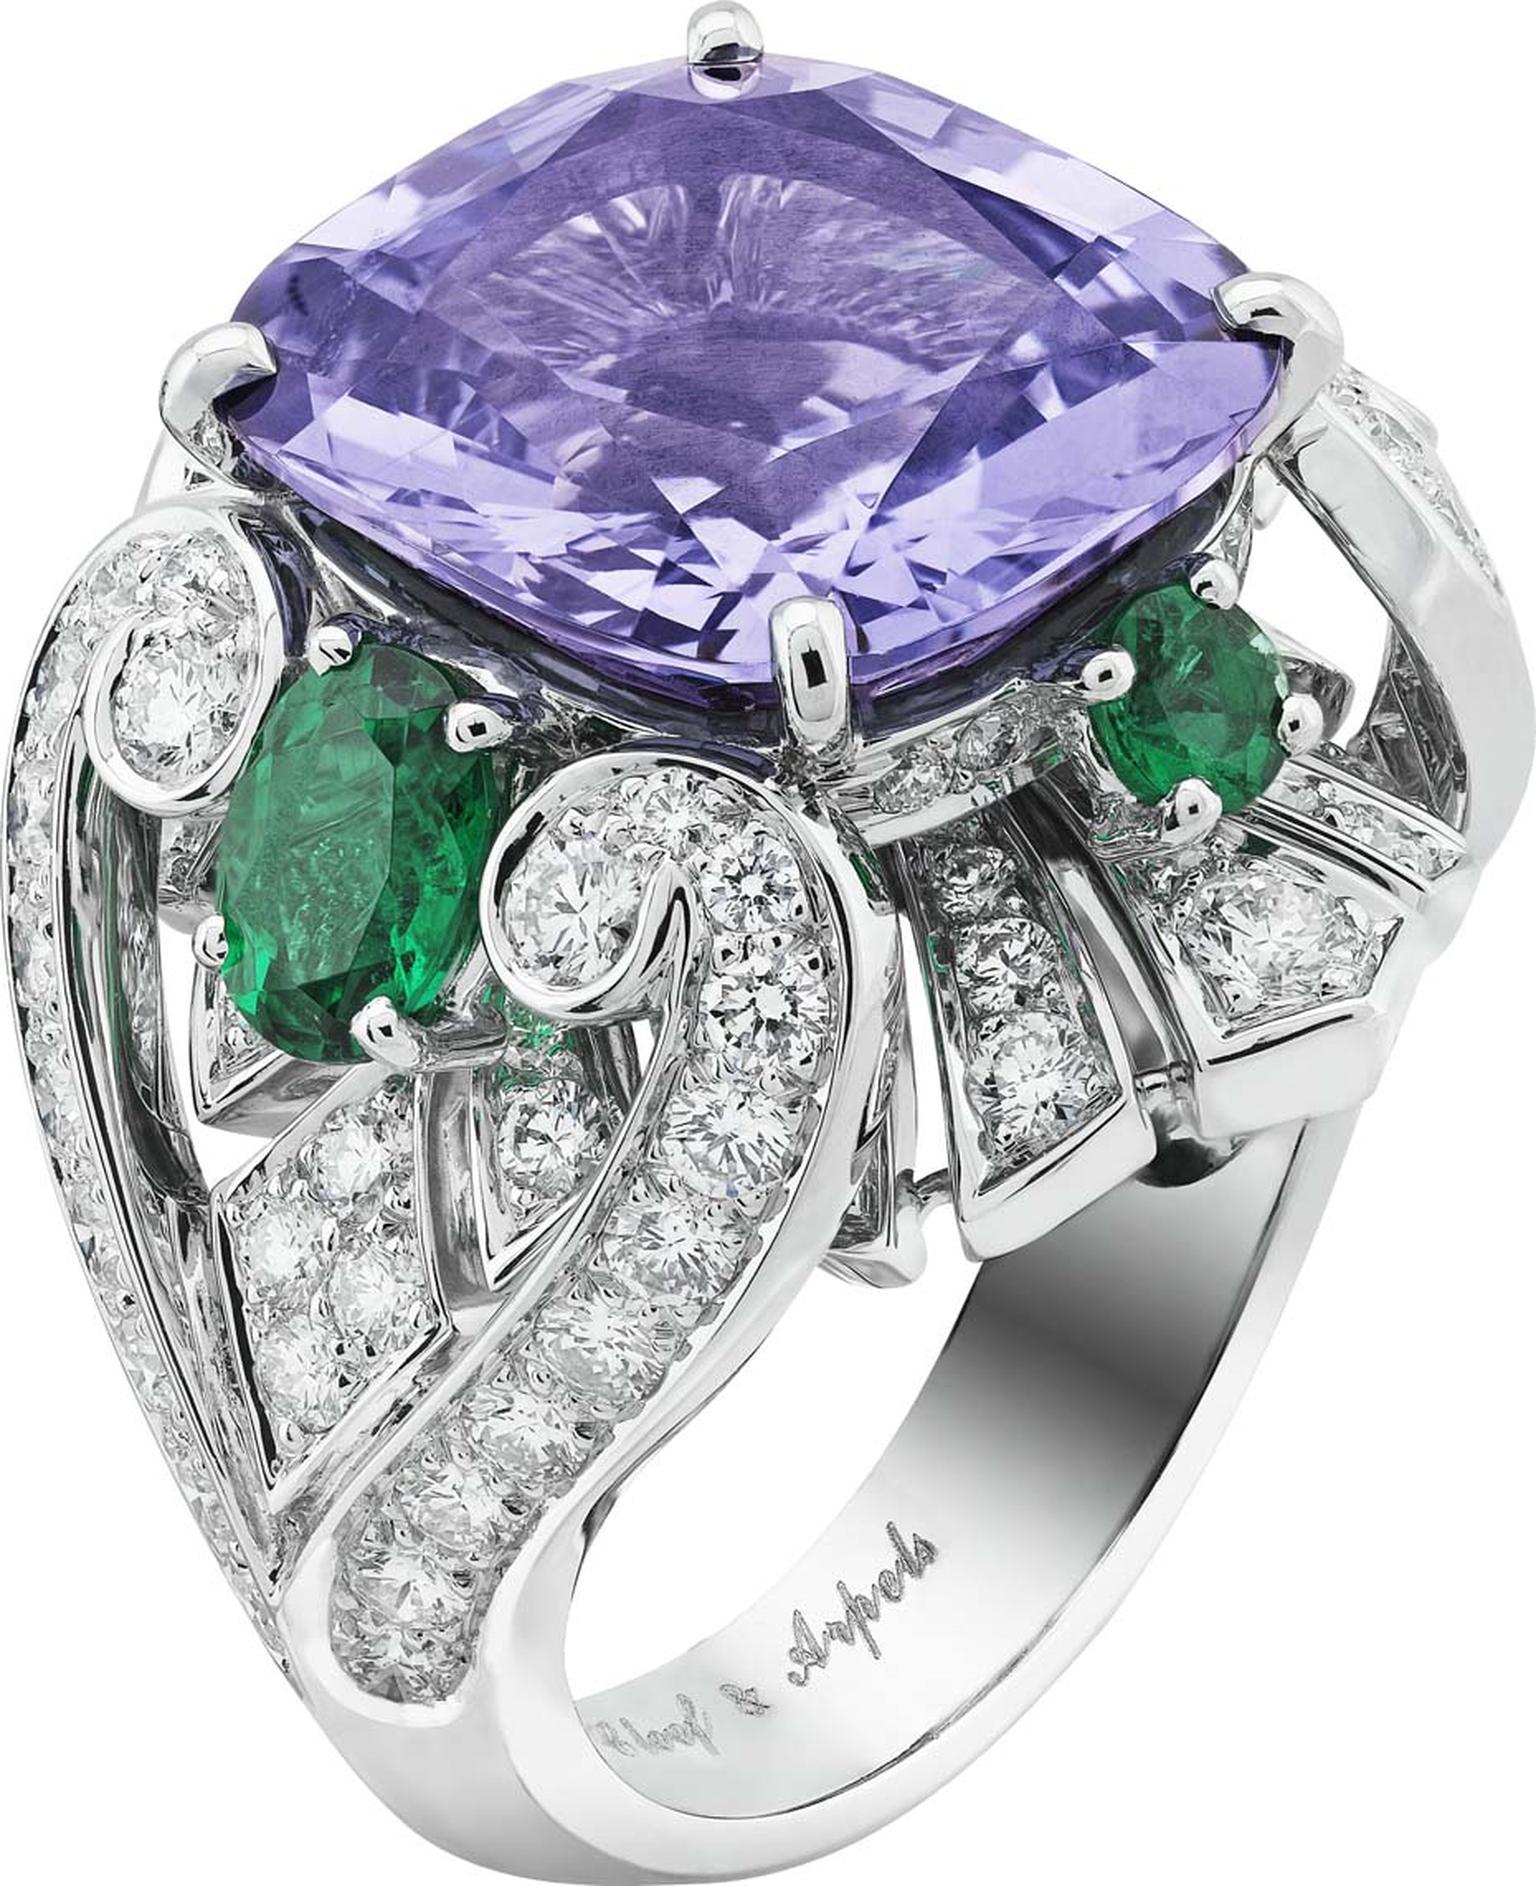 Van Cleef & Arpels Peau d'Ane white gold The Enchanted Forest collection Flower Night ring featuring diamonds, oval and round cut emeralds and a central 10.45ct  purple cushion cut spinel.